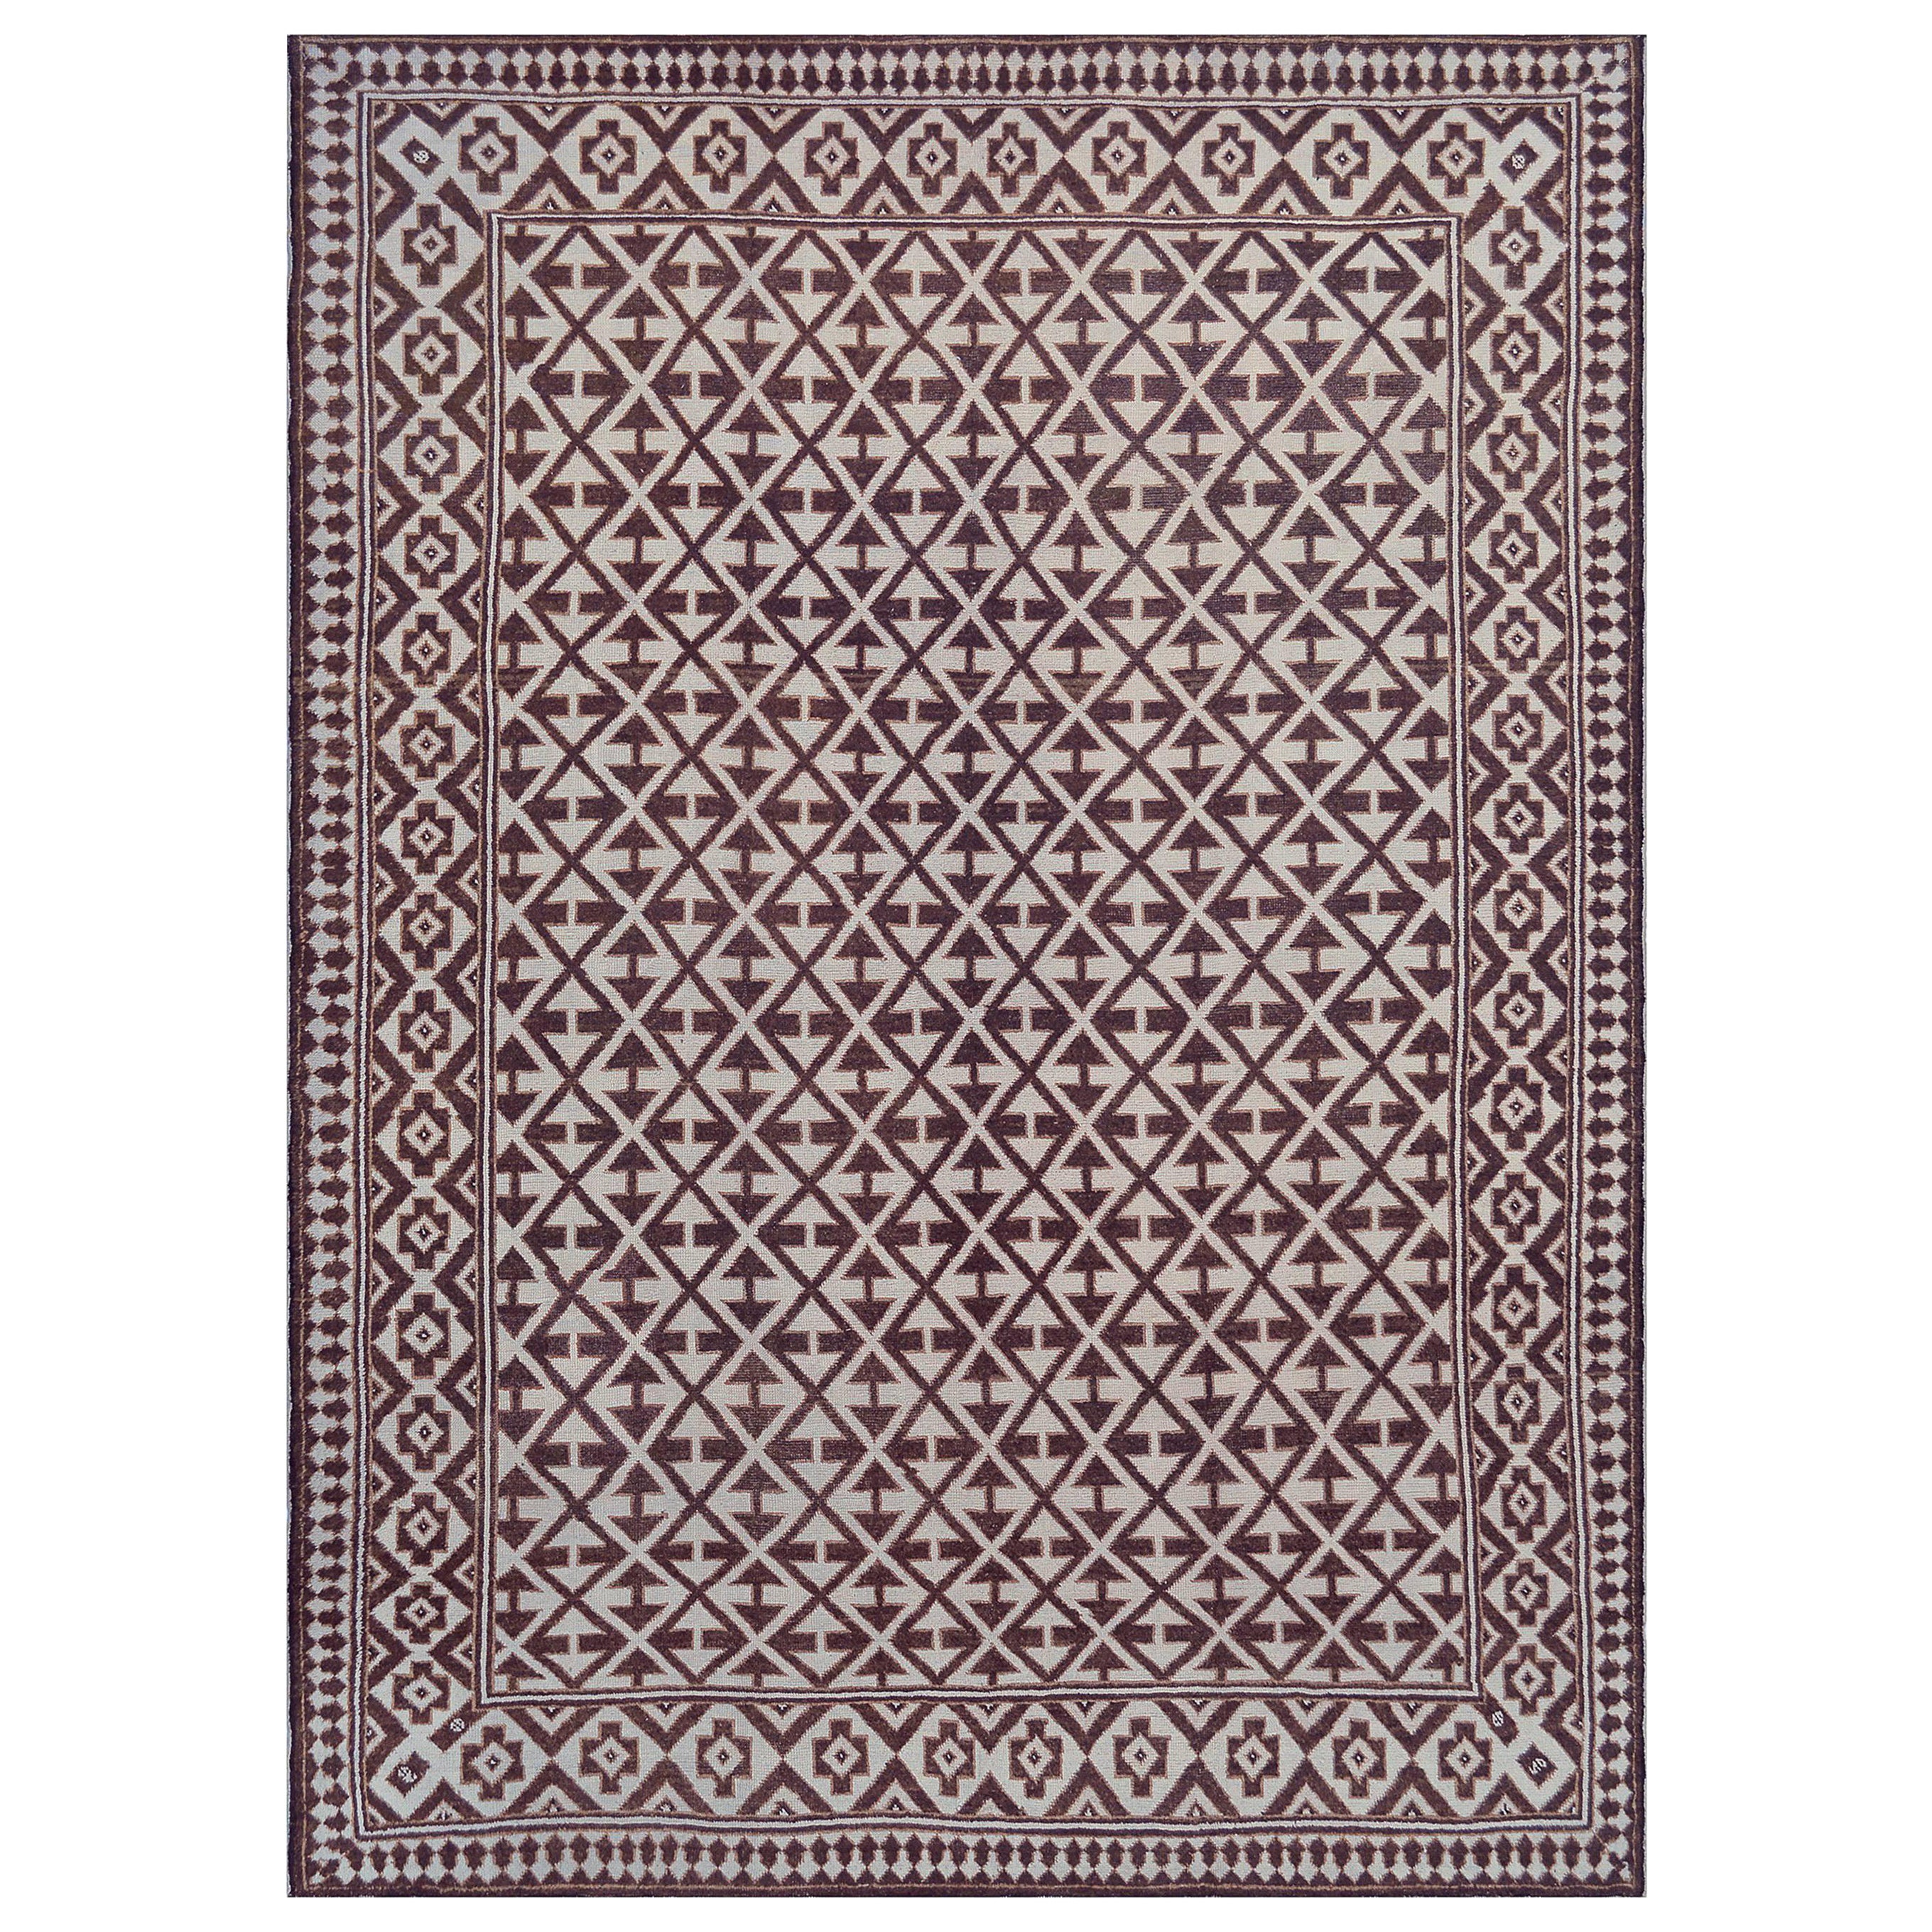 Early 20th Century Wool Handwoven Moroccan Rug